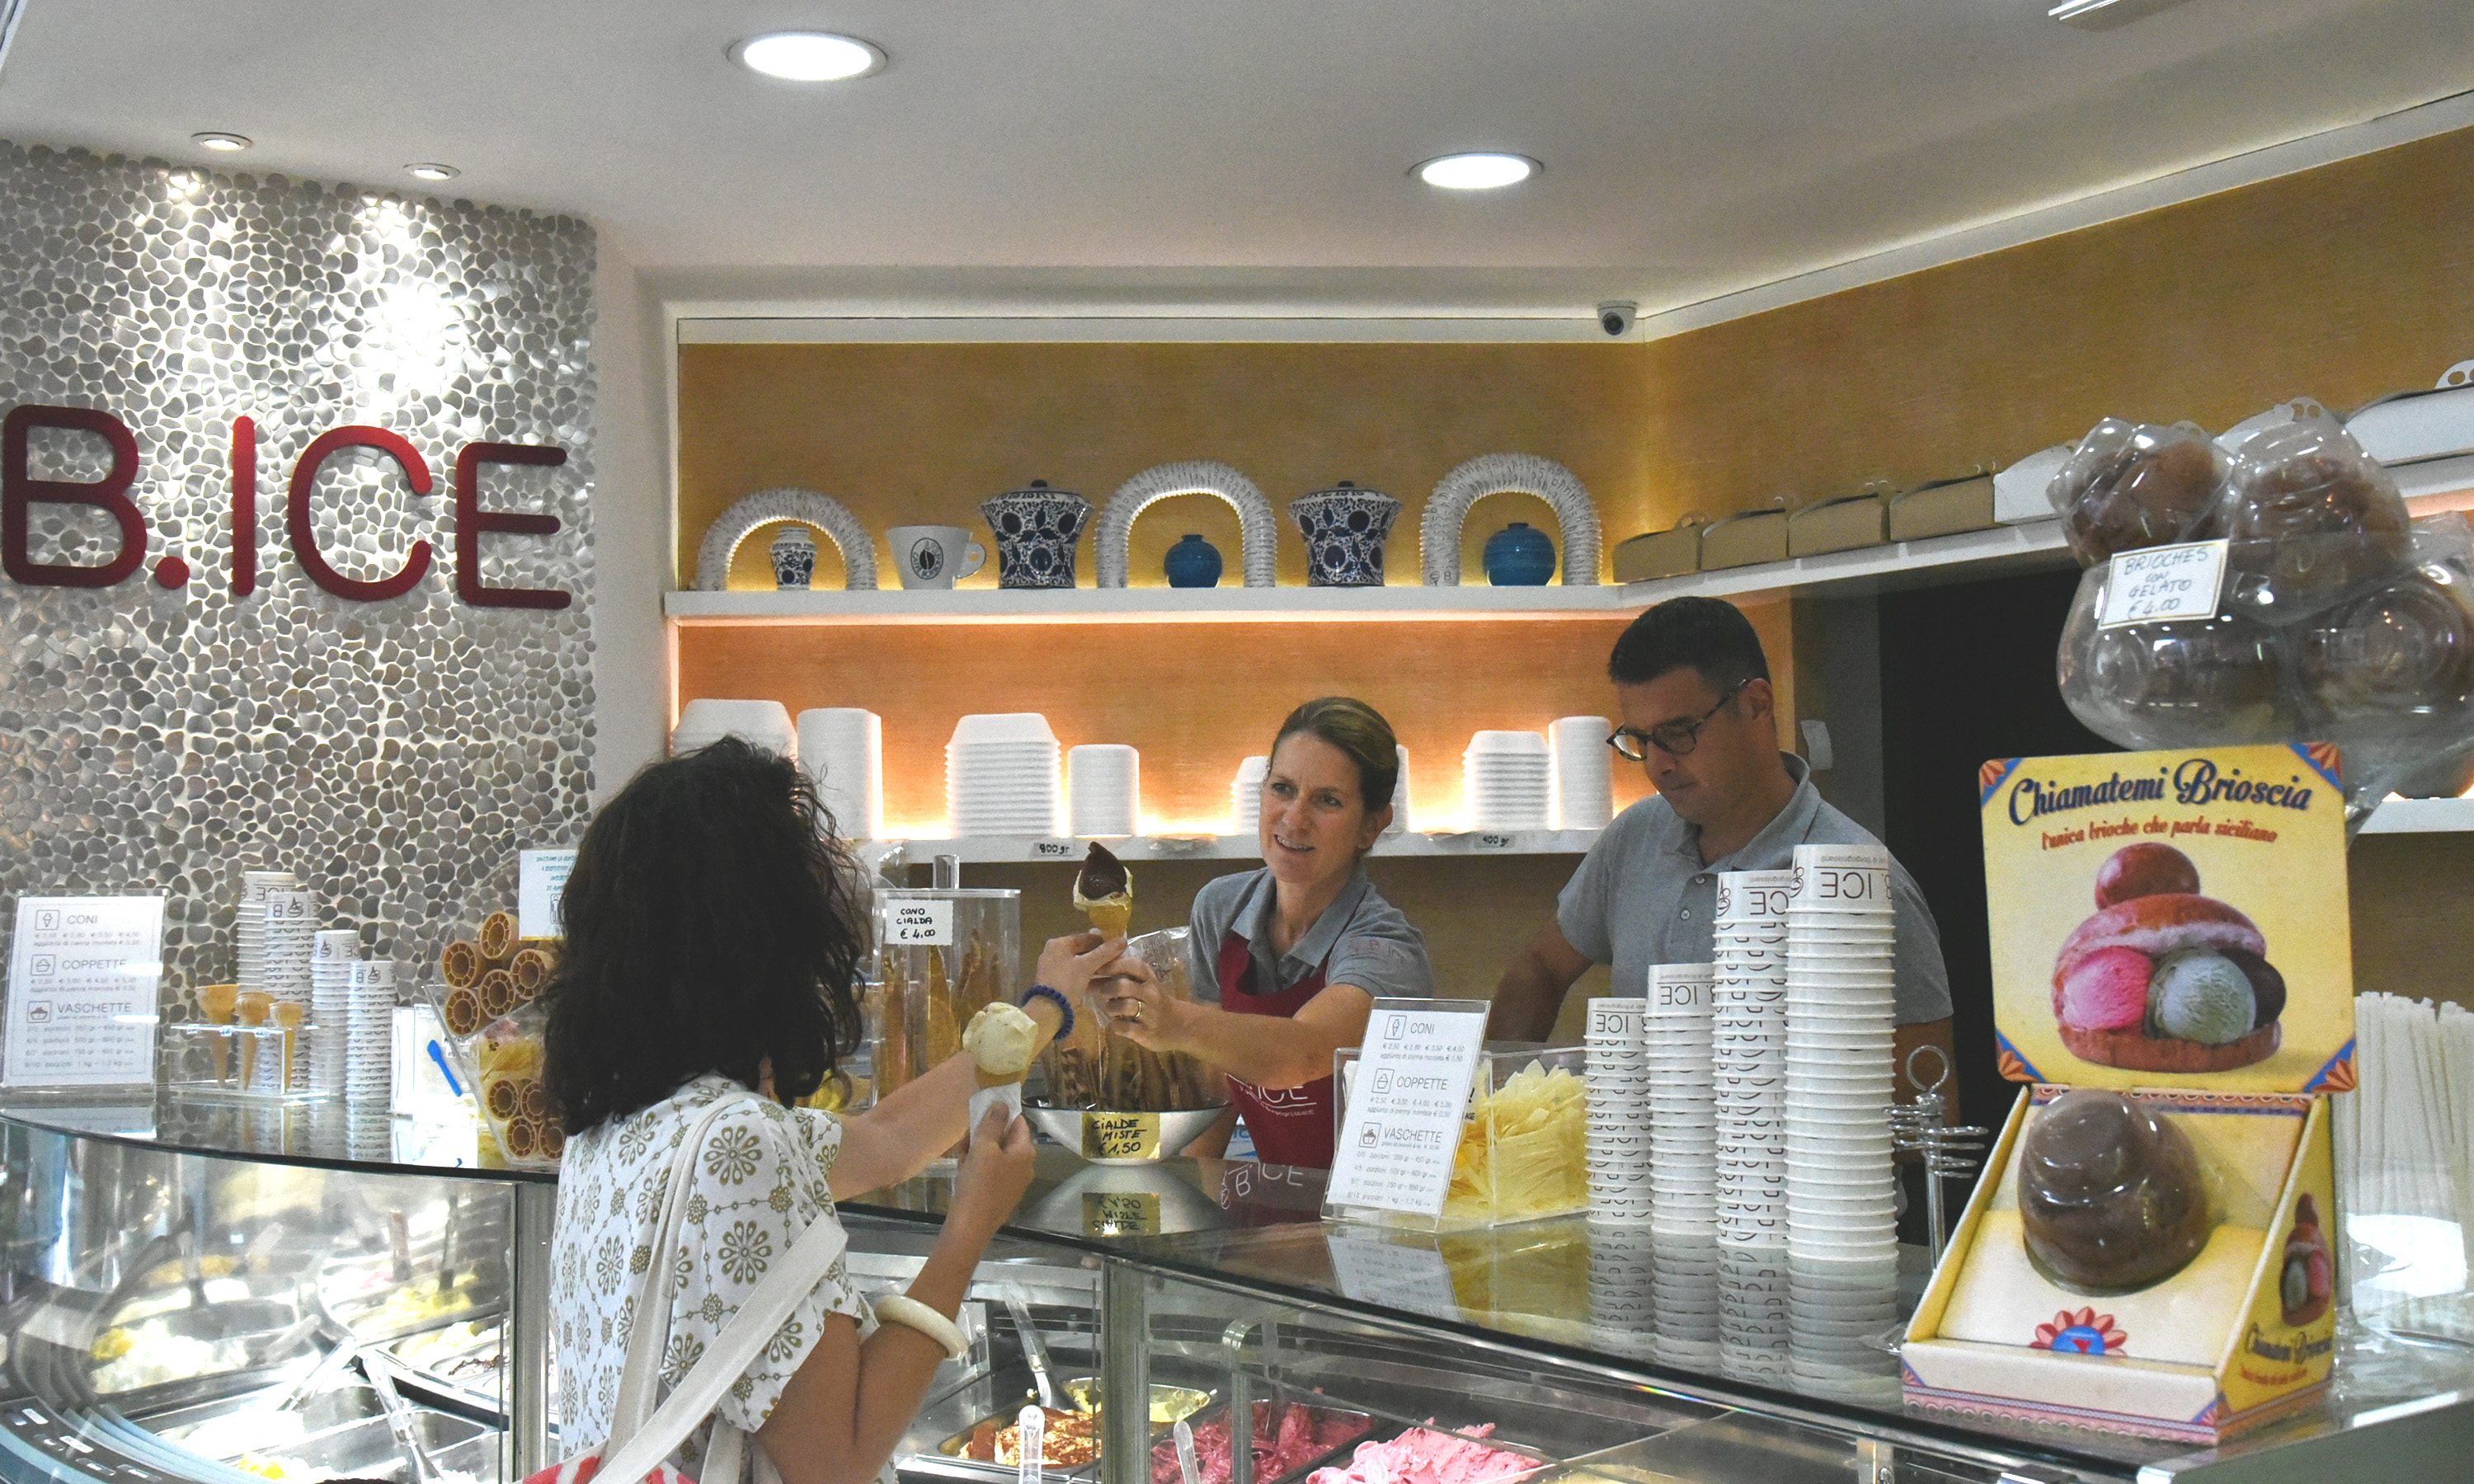 The owners of the gelateria B.ICE, Cristina and Aldo, serving a gelato to a client 